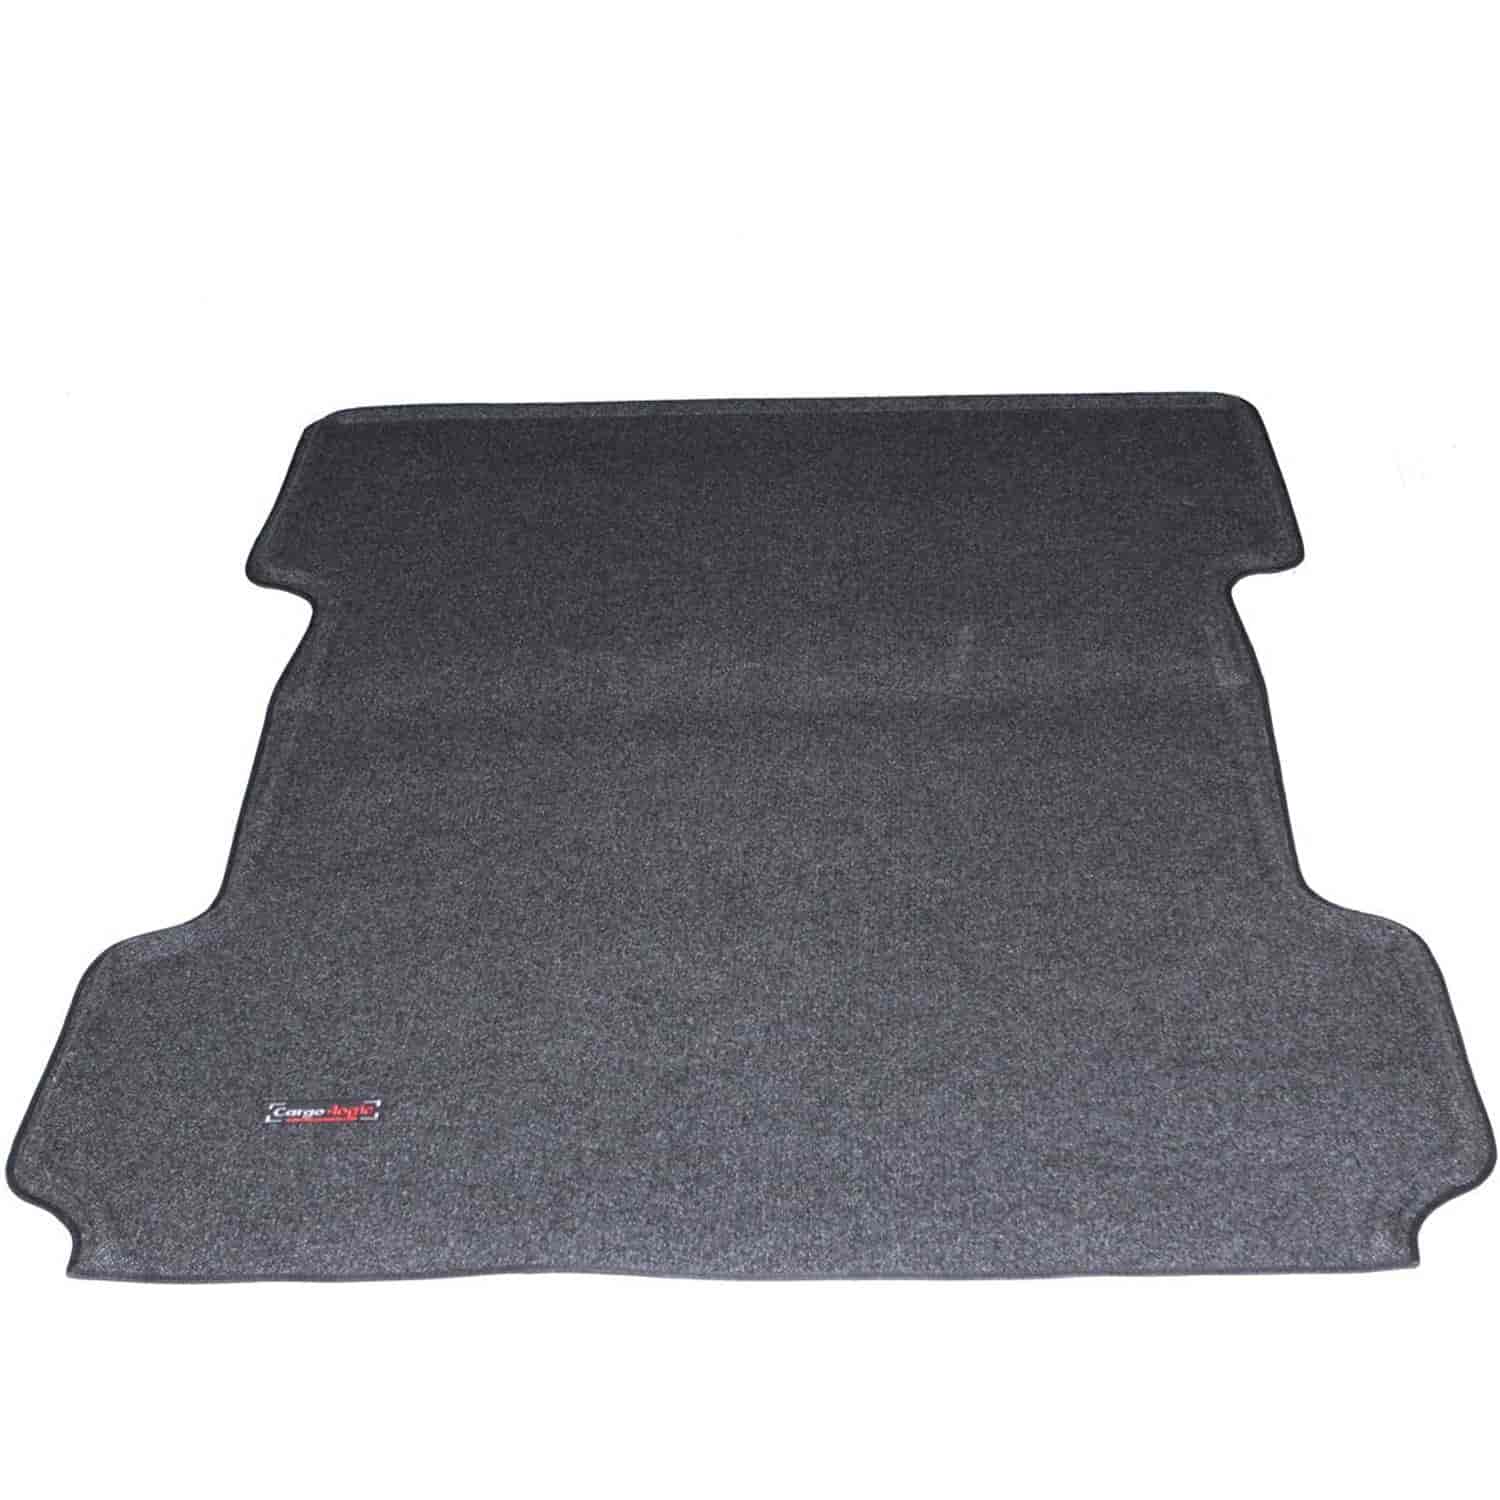 Cargo Logic Truck Bed Liner for 2007-2014 Chevy